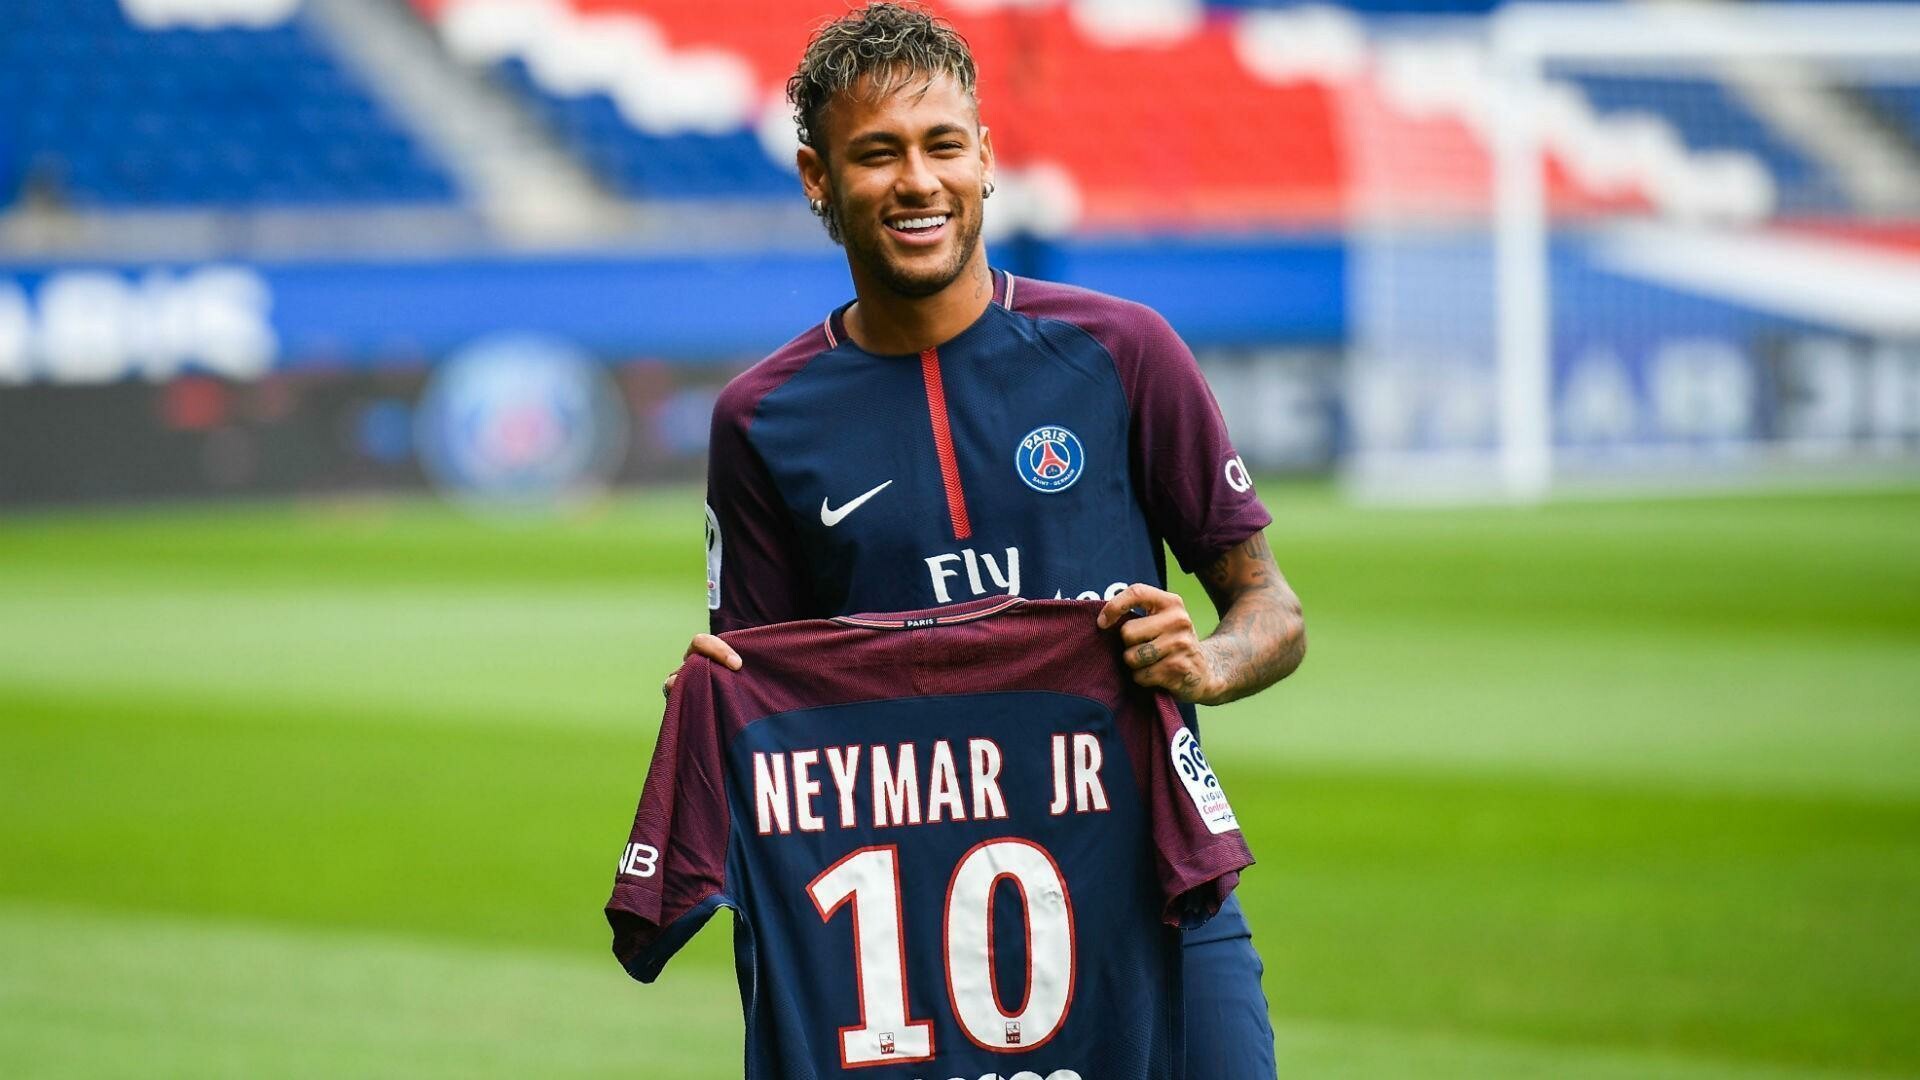 Neymar: PSG, He made his debut for Les Rouge-et-Bleu on 13 August 2017. 1920x1080 Full HD Background.